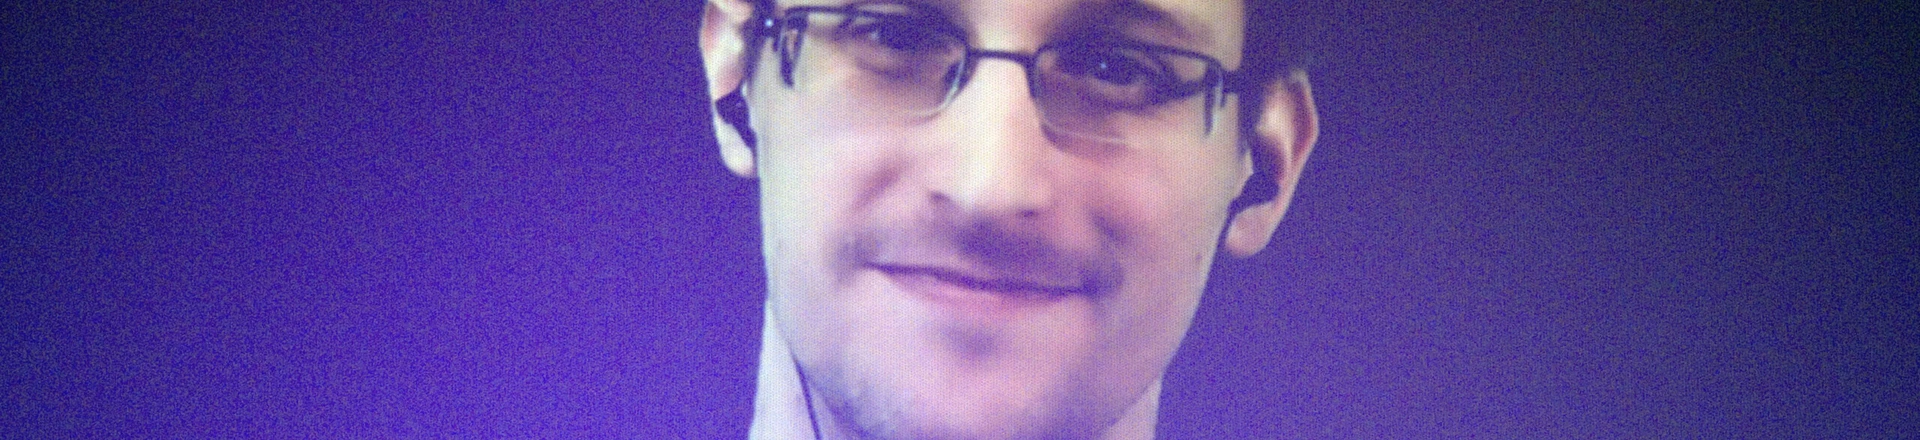 Former U.S. National Security Agency contractor Edward Snowden, who is in Moscow, is seen on a giant screen during a live video conference for an interview as part of Amnesty International's annual Write for Rights campaign at the Gaite Lyrique in Paris, France, Dec. 10, 2014. (AP Photo/Charles Platiau, Pool)